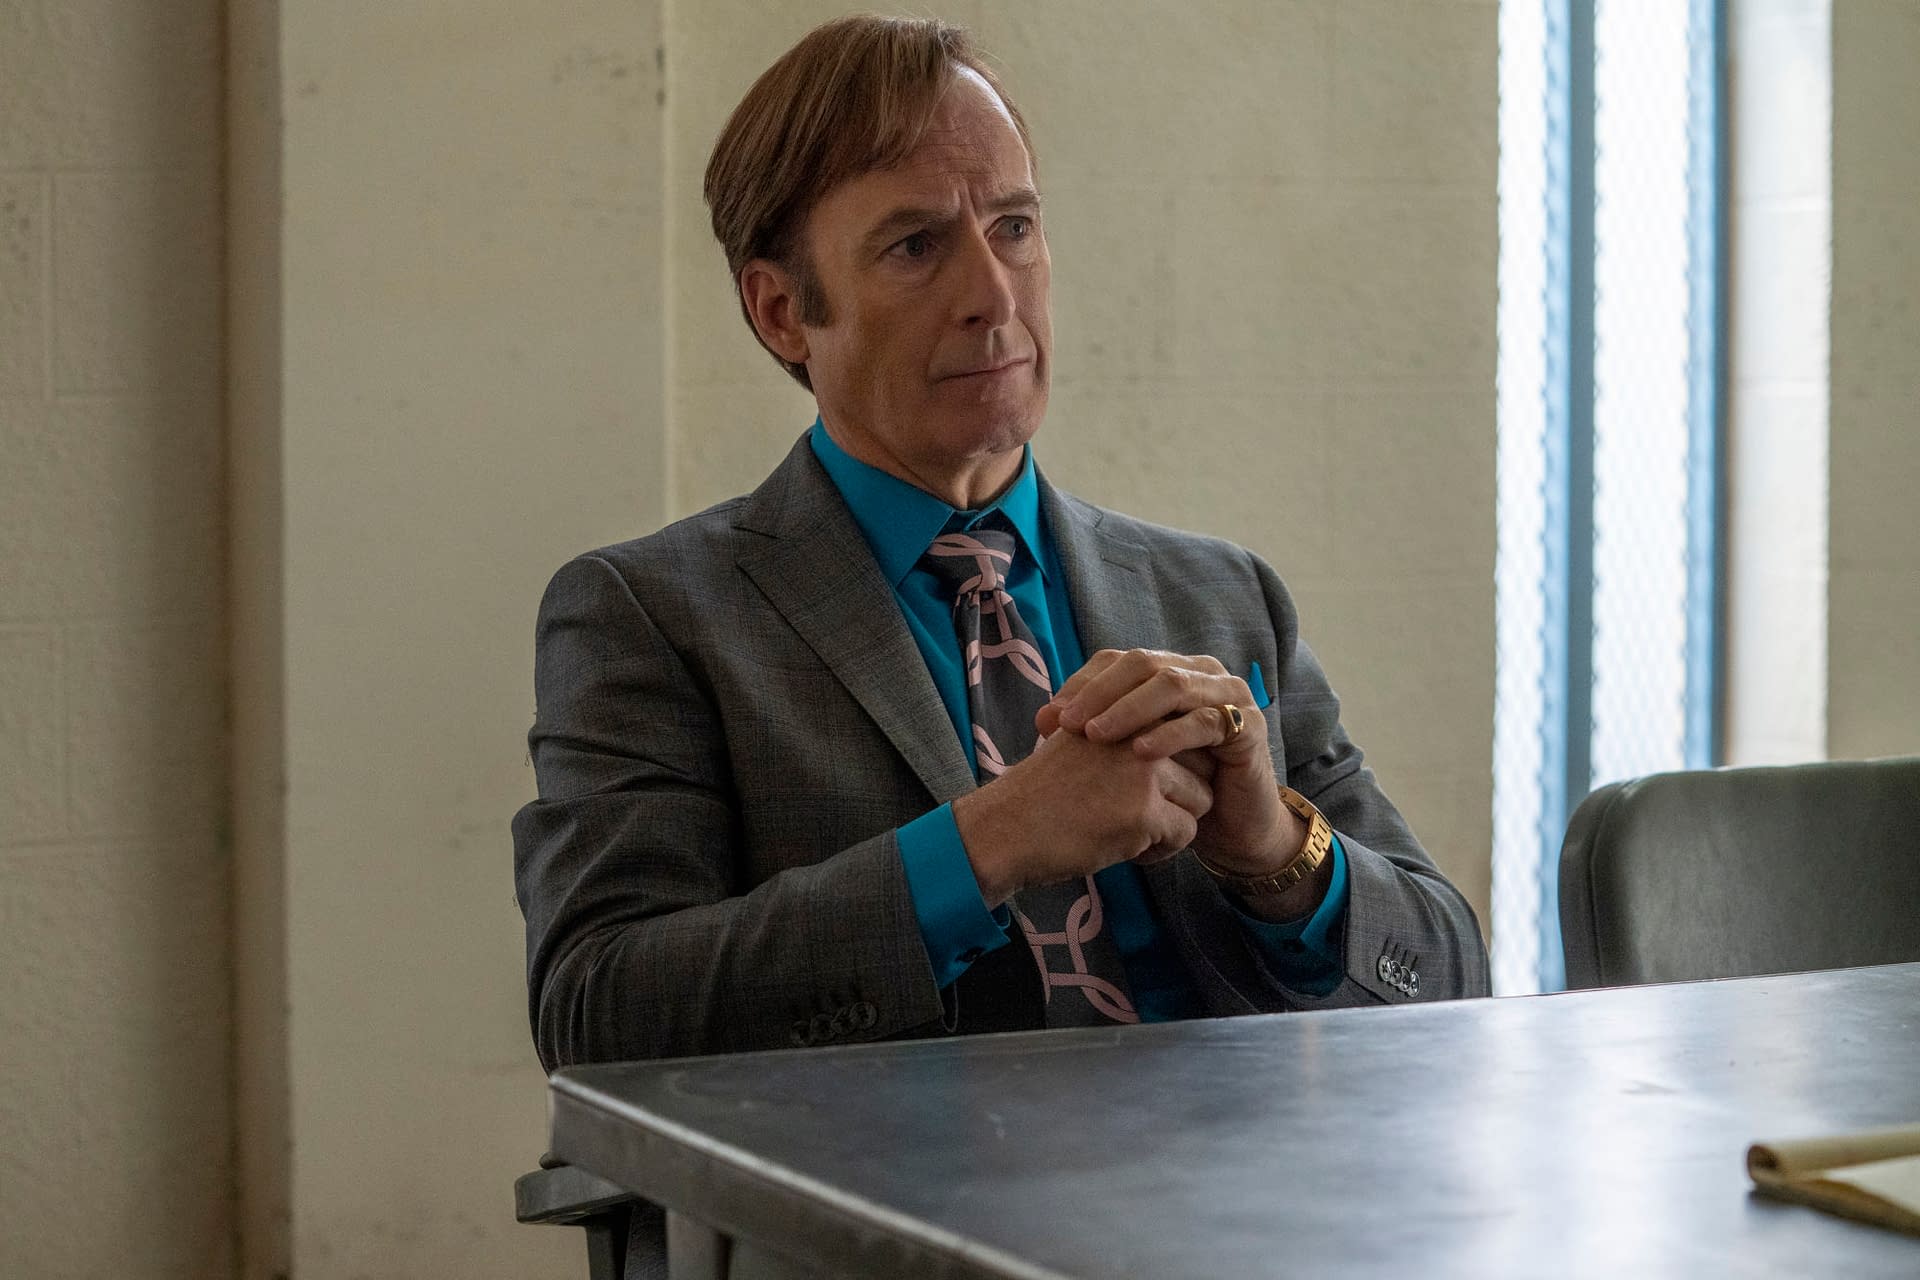 "Better Call Saul" Season 5 "The Guy For This": DEA Agents Schrader &#038; Gomez, At Your Service [PREVIEW]